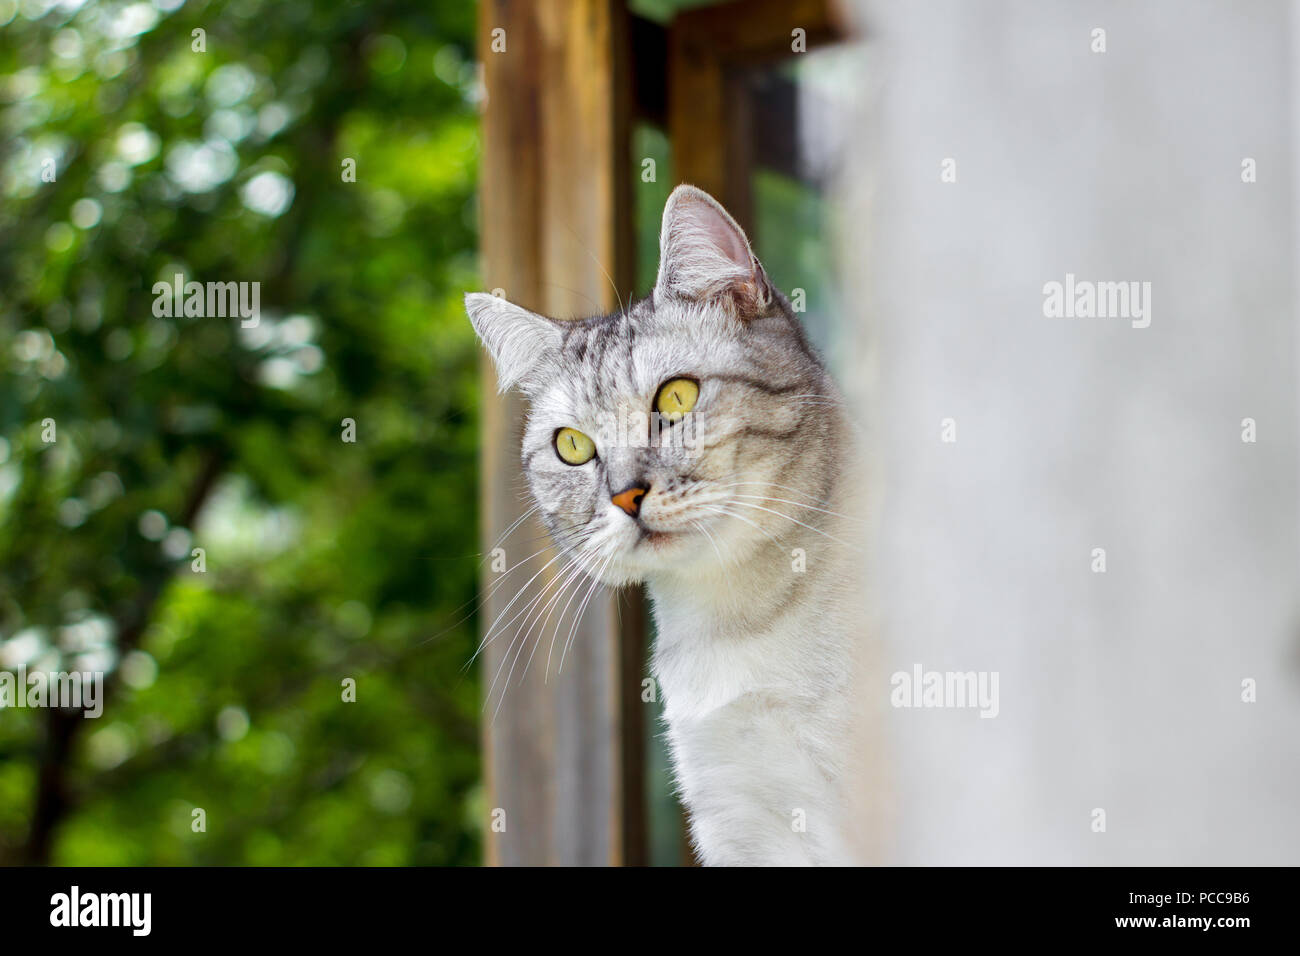 View from the corner: gray cat sitting on green leaves bokeh blurred background Stock Photo